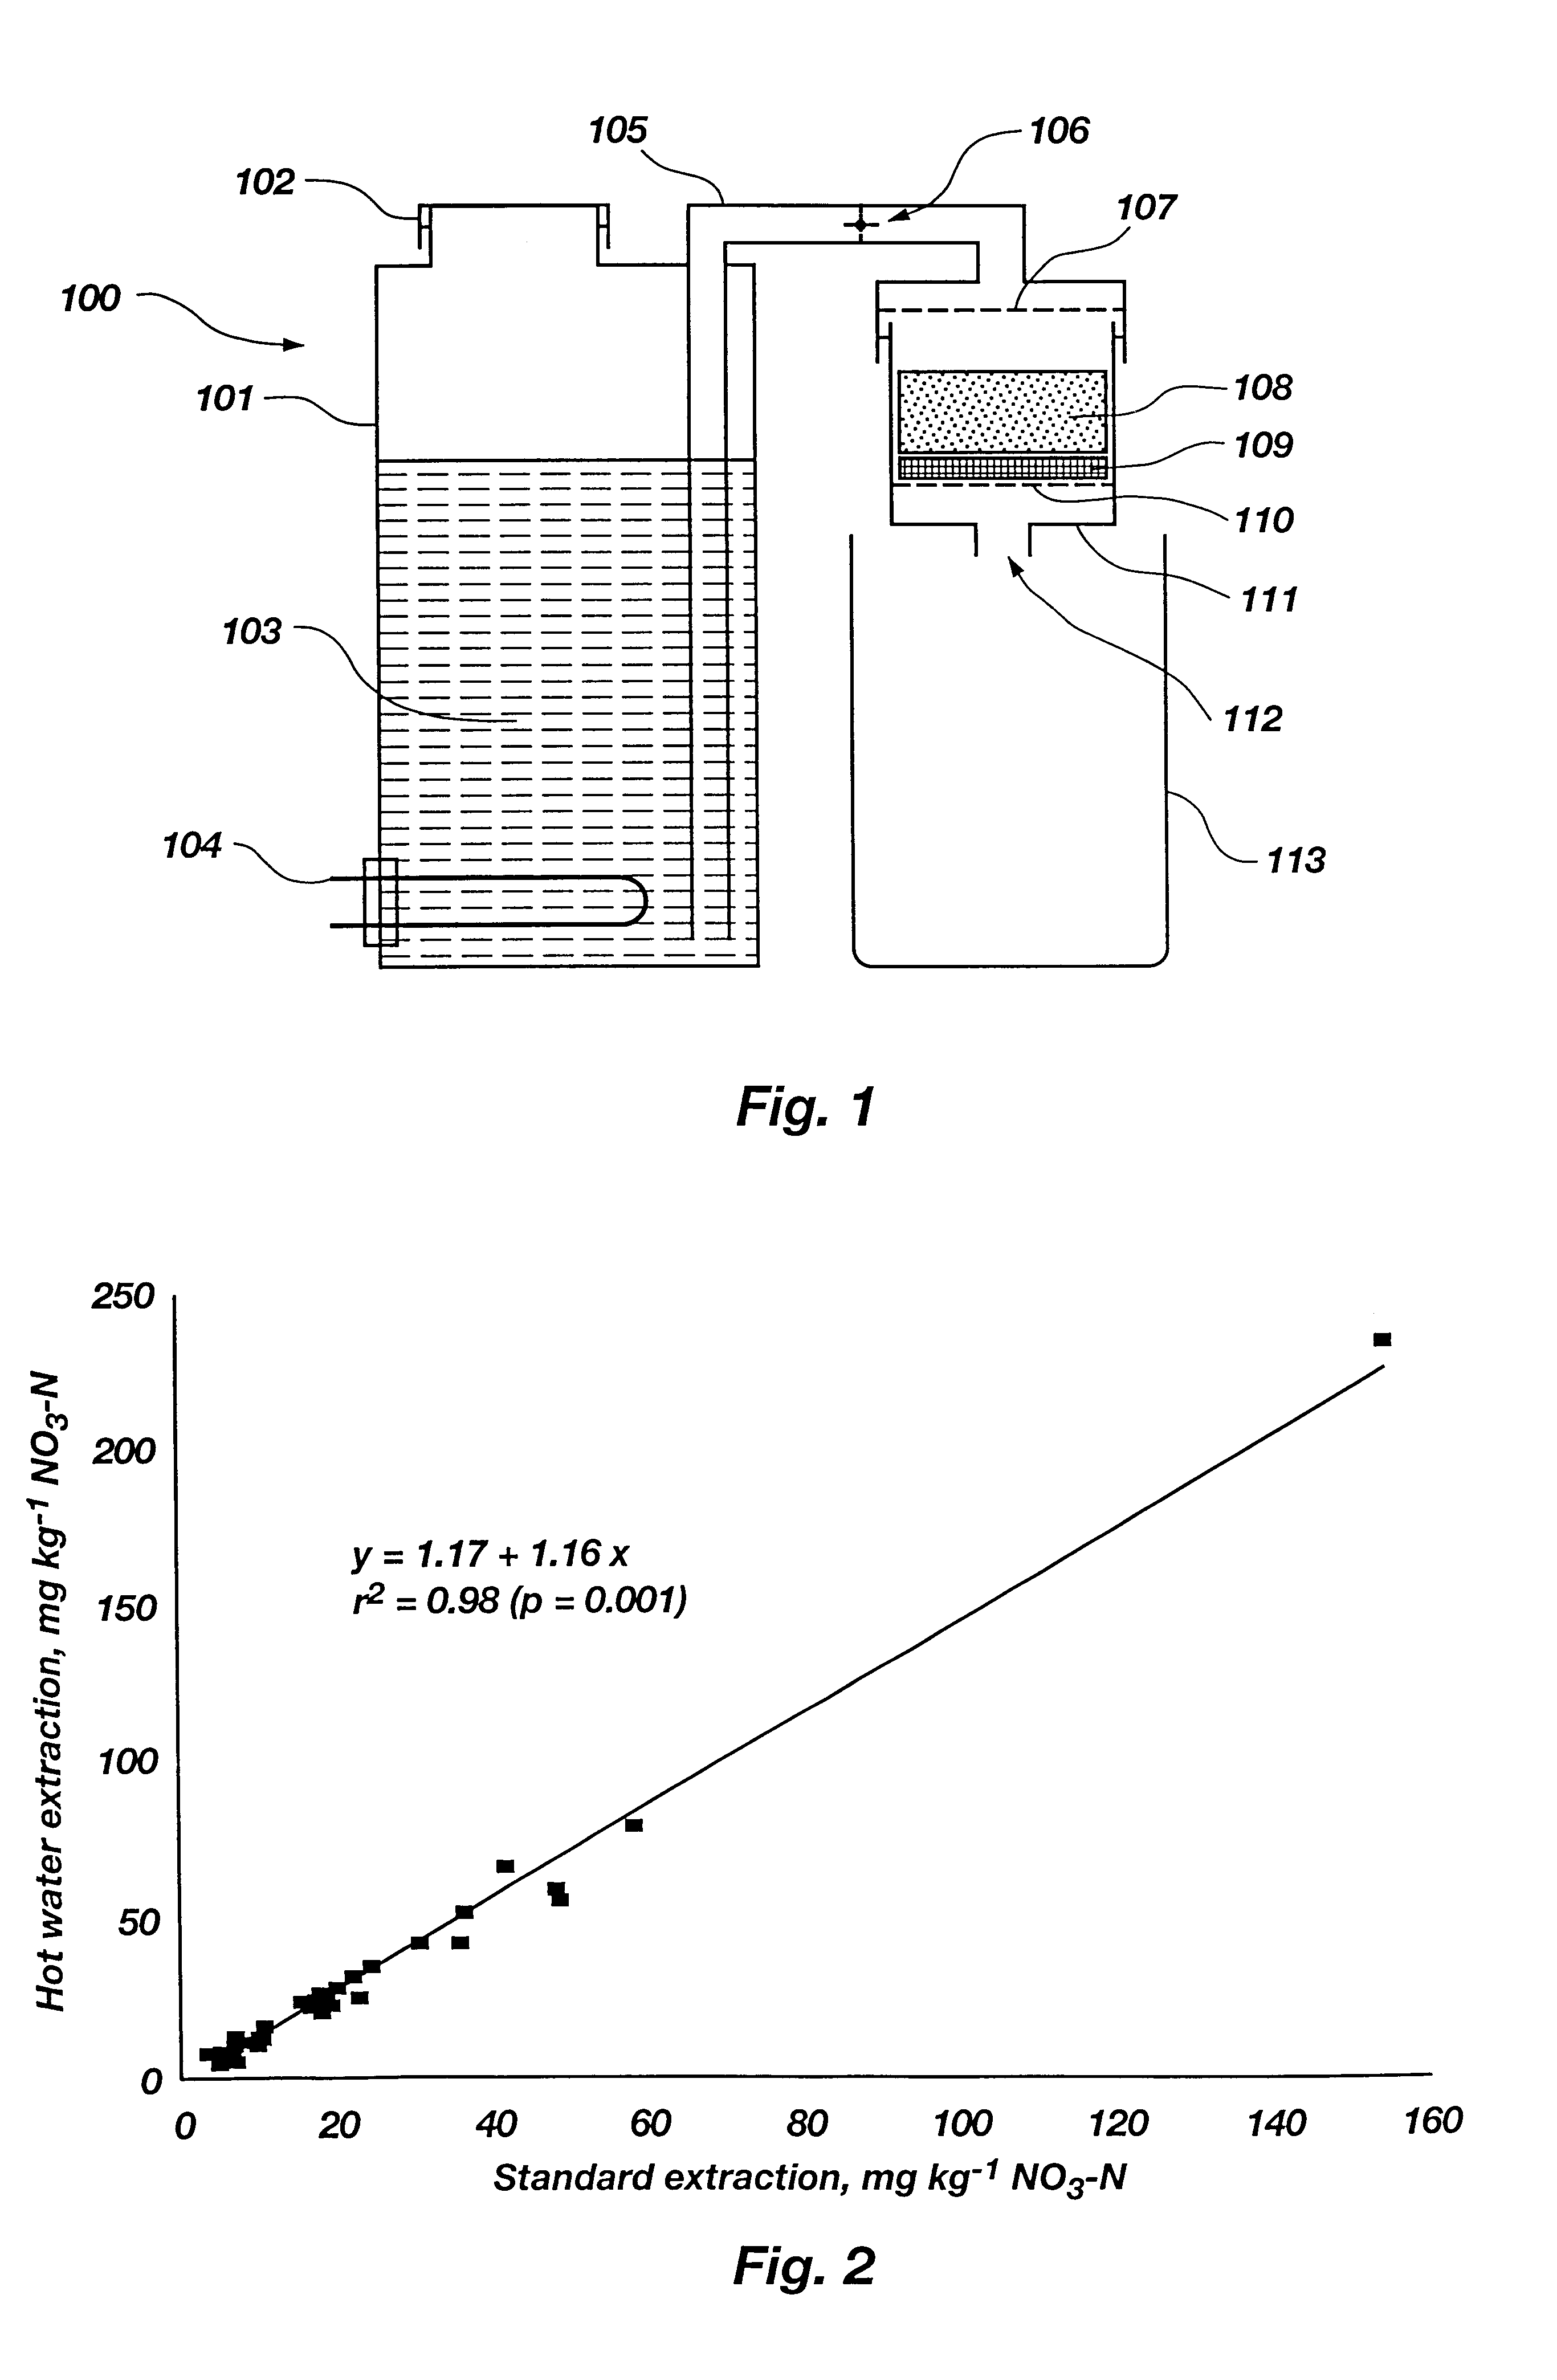 Automated soil analysis system